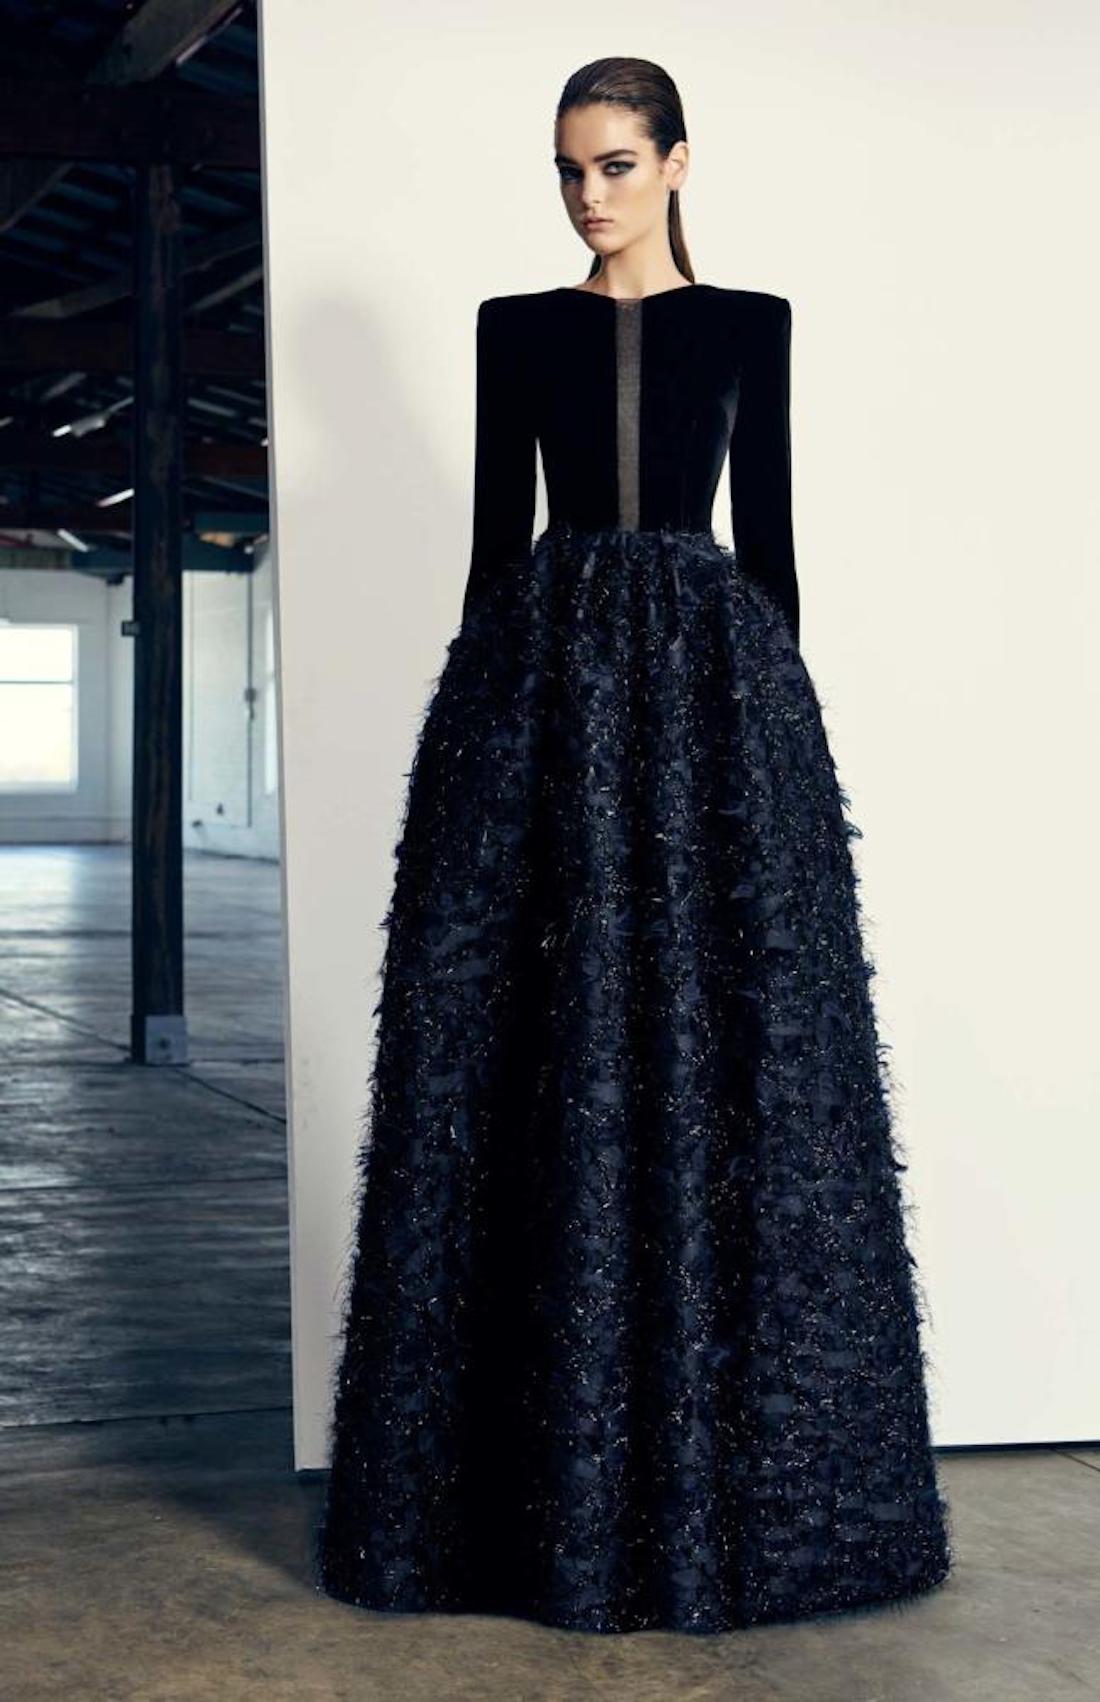 10 Perfect Little Black Dresses from Alex Perry – Project FairyTale